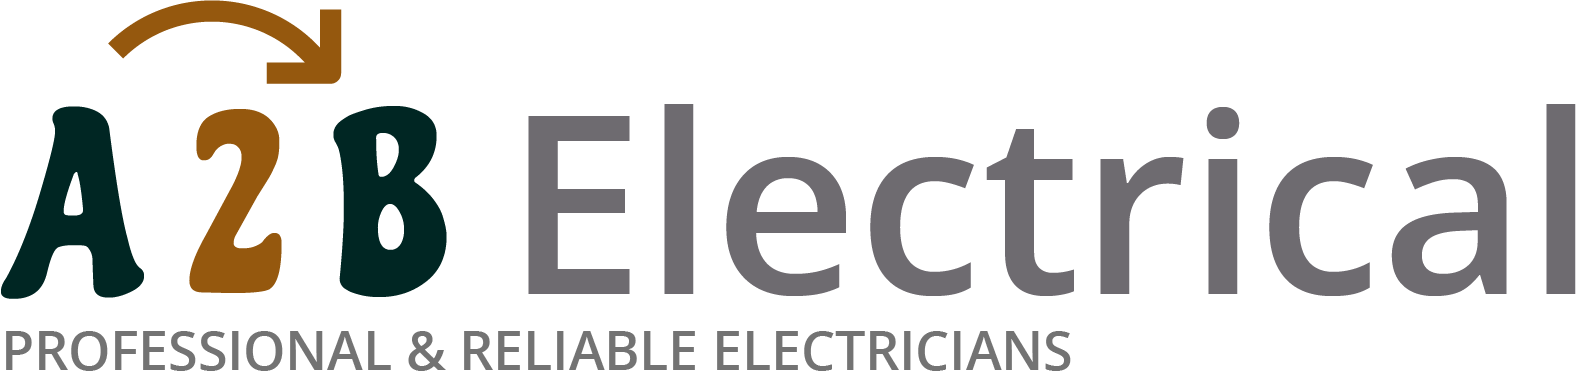 If you have electrical wiring problems in Horsforth, we can provide an electrician to have a look for you. 